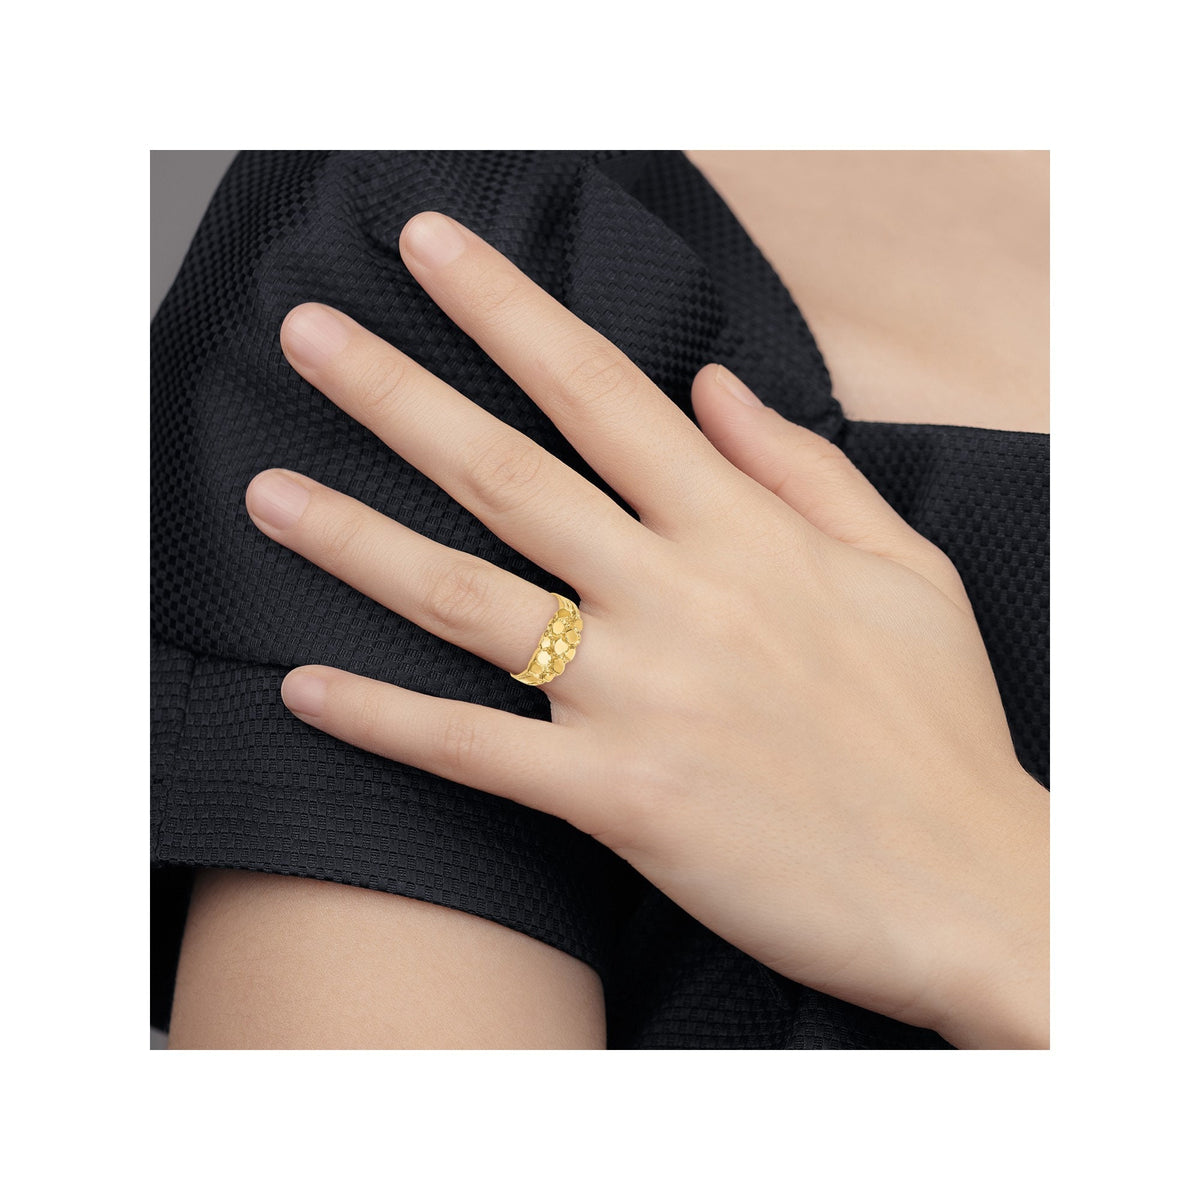 Womens 14k Gold Nugget Ring Band available in 14k Yellow Gold 2.1 Grams (Not Plated or Filled) Gift Box Included - Made in USA